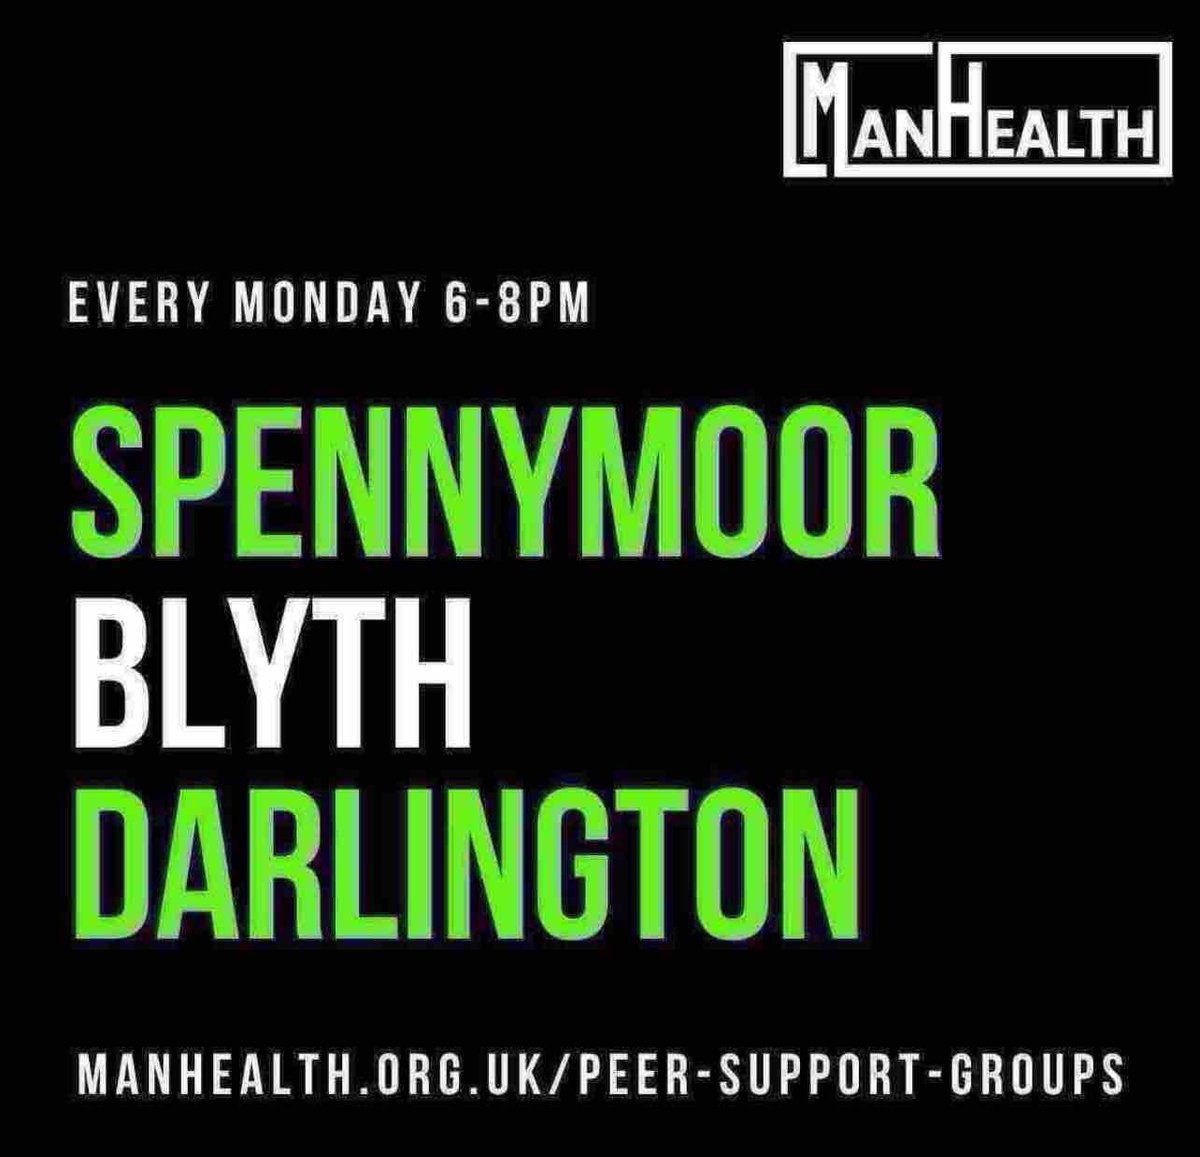 Monday tomorrow (like we need reminding!) but a reminder of where our support groups are which start at 6pm. Find out more: manhealth.org.uk/peer-support-g… Please share.